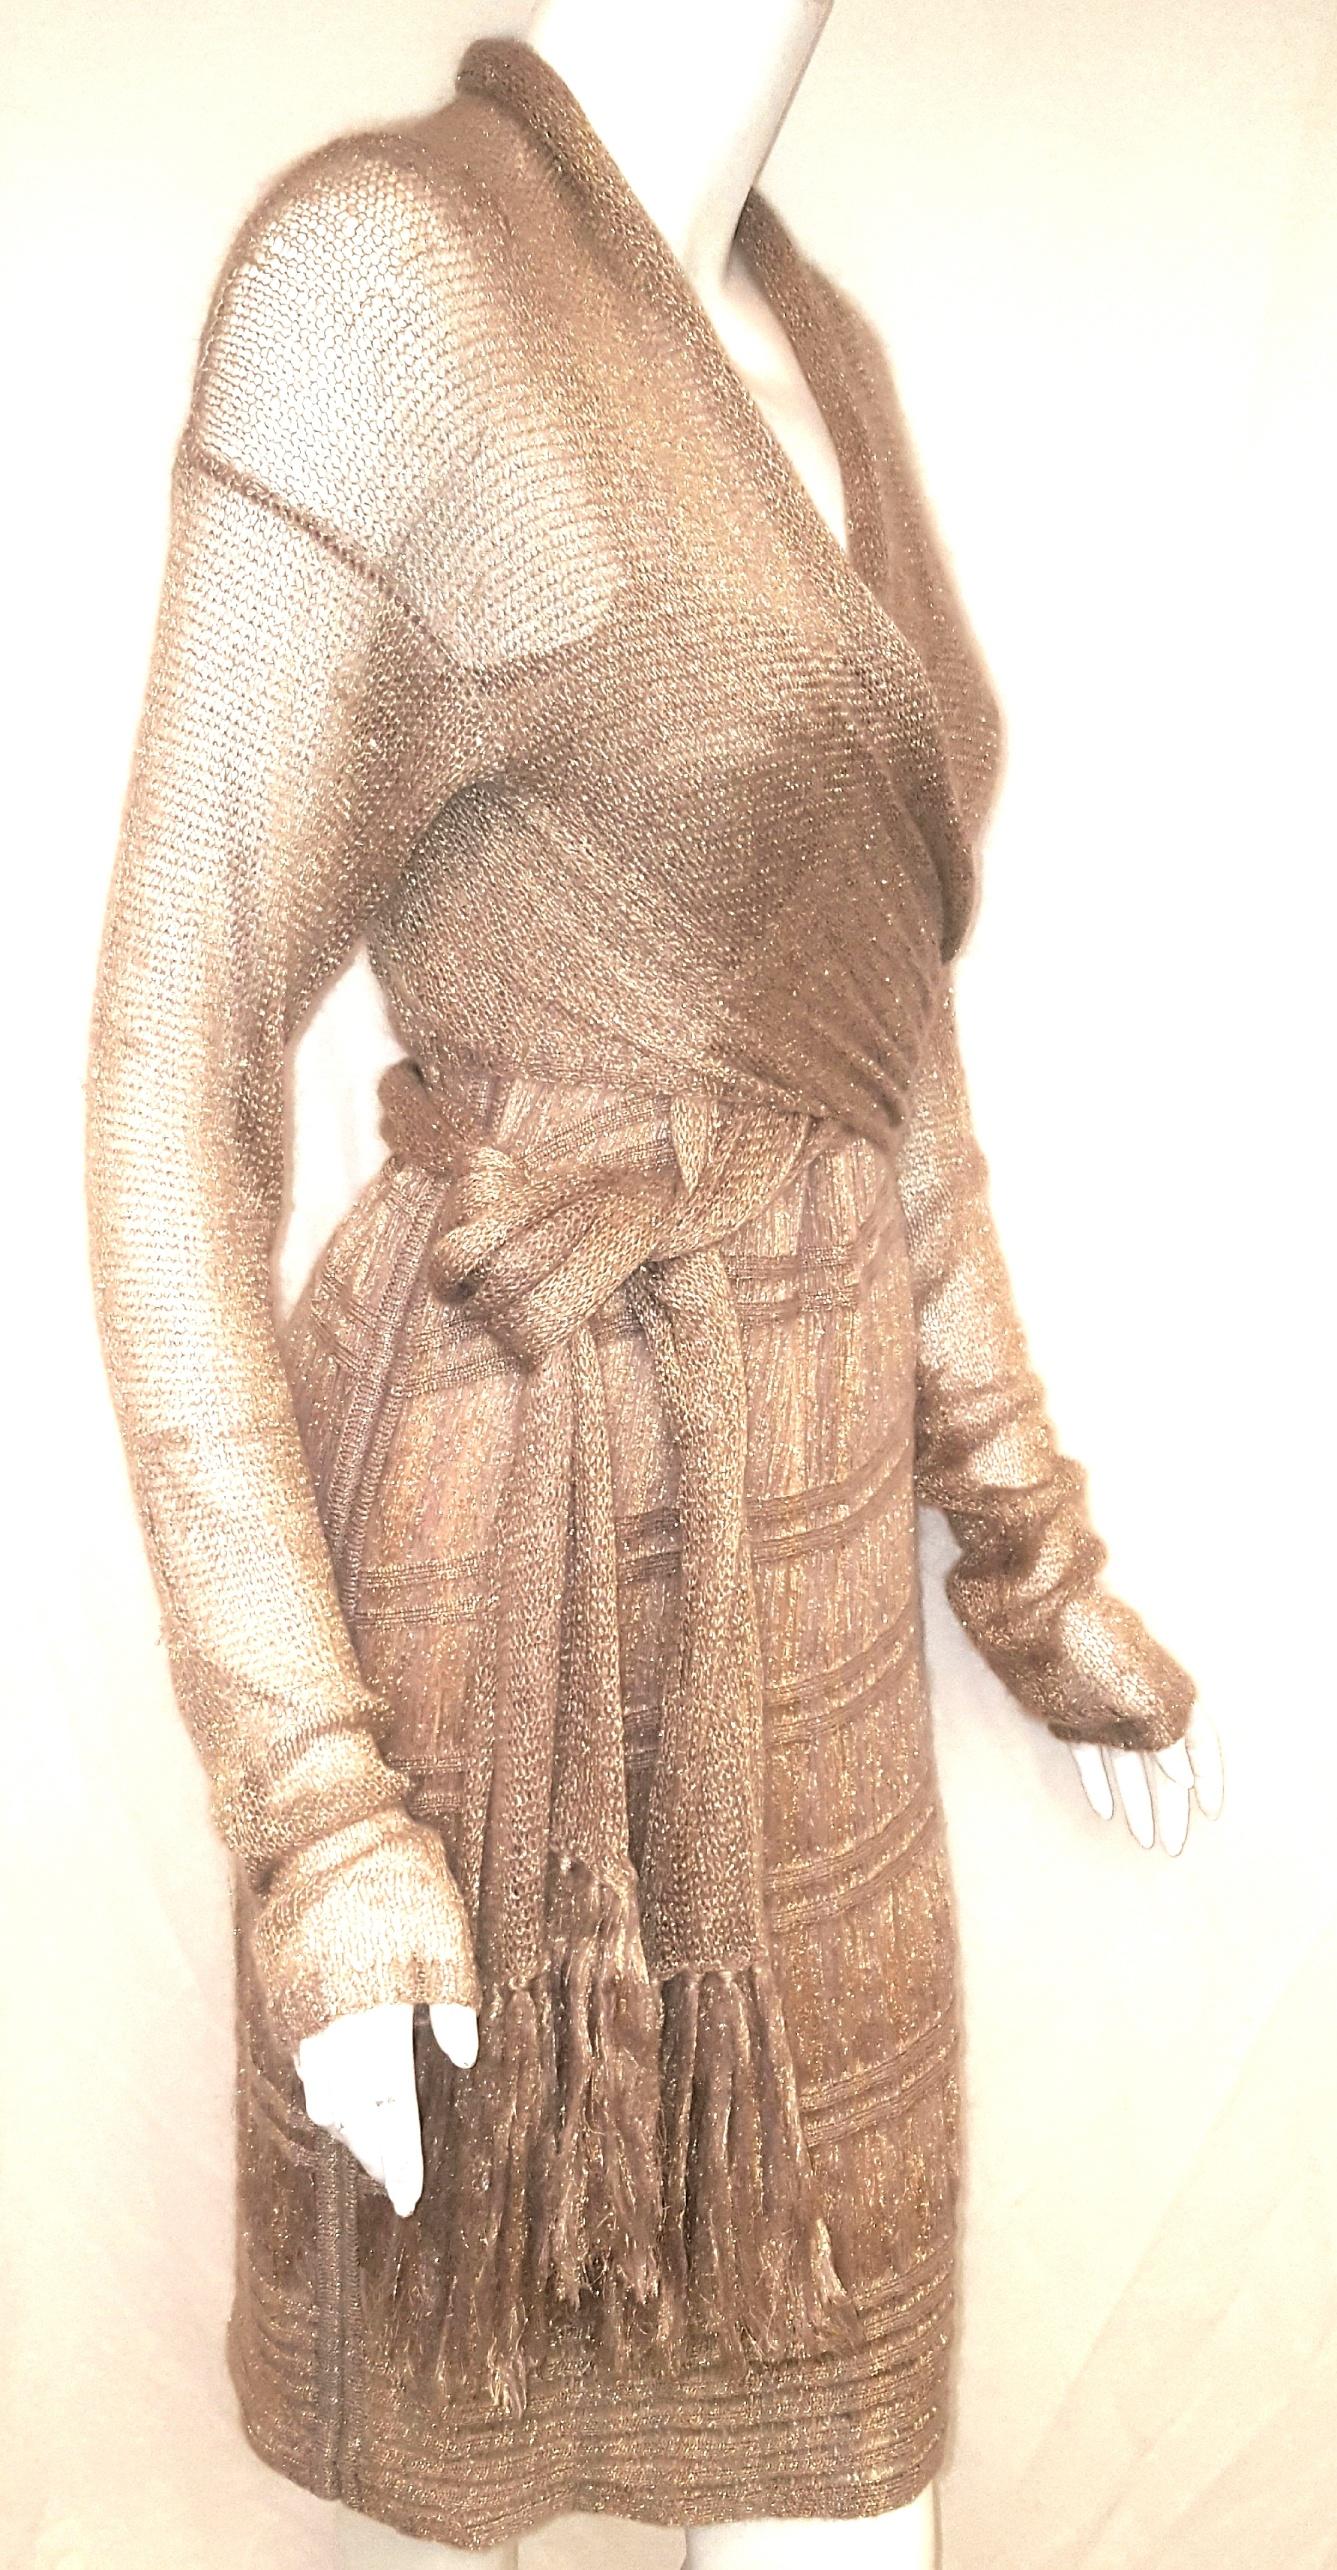 Missoni Multi-layered knit dress ensemble for a soft look that is both pretty and tough brings to mind a modern desert nomad. Individual pieces bring comfort and style to this three piece grouping.   The dress can be worn by itself, a thin strap